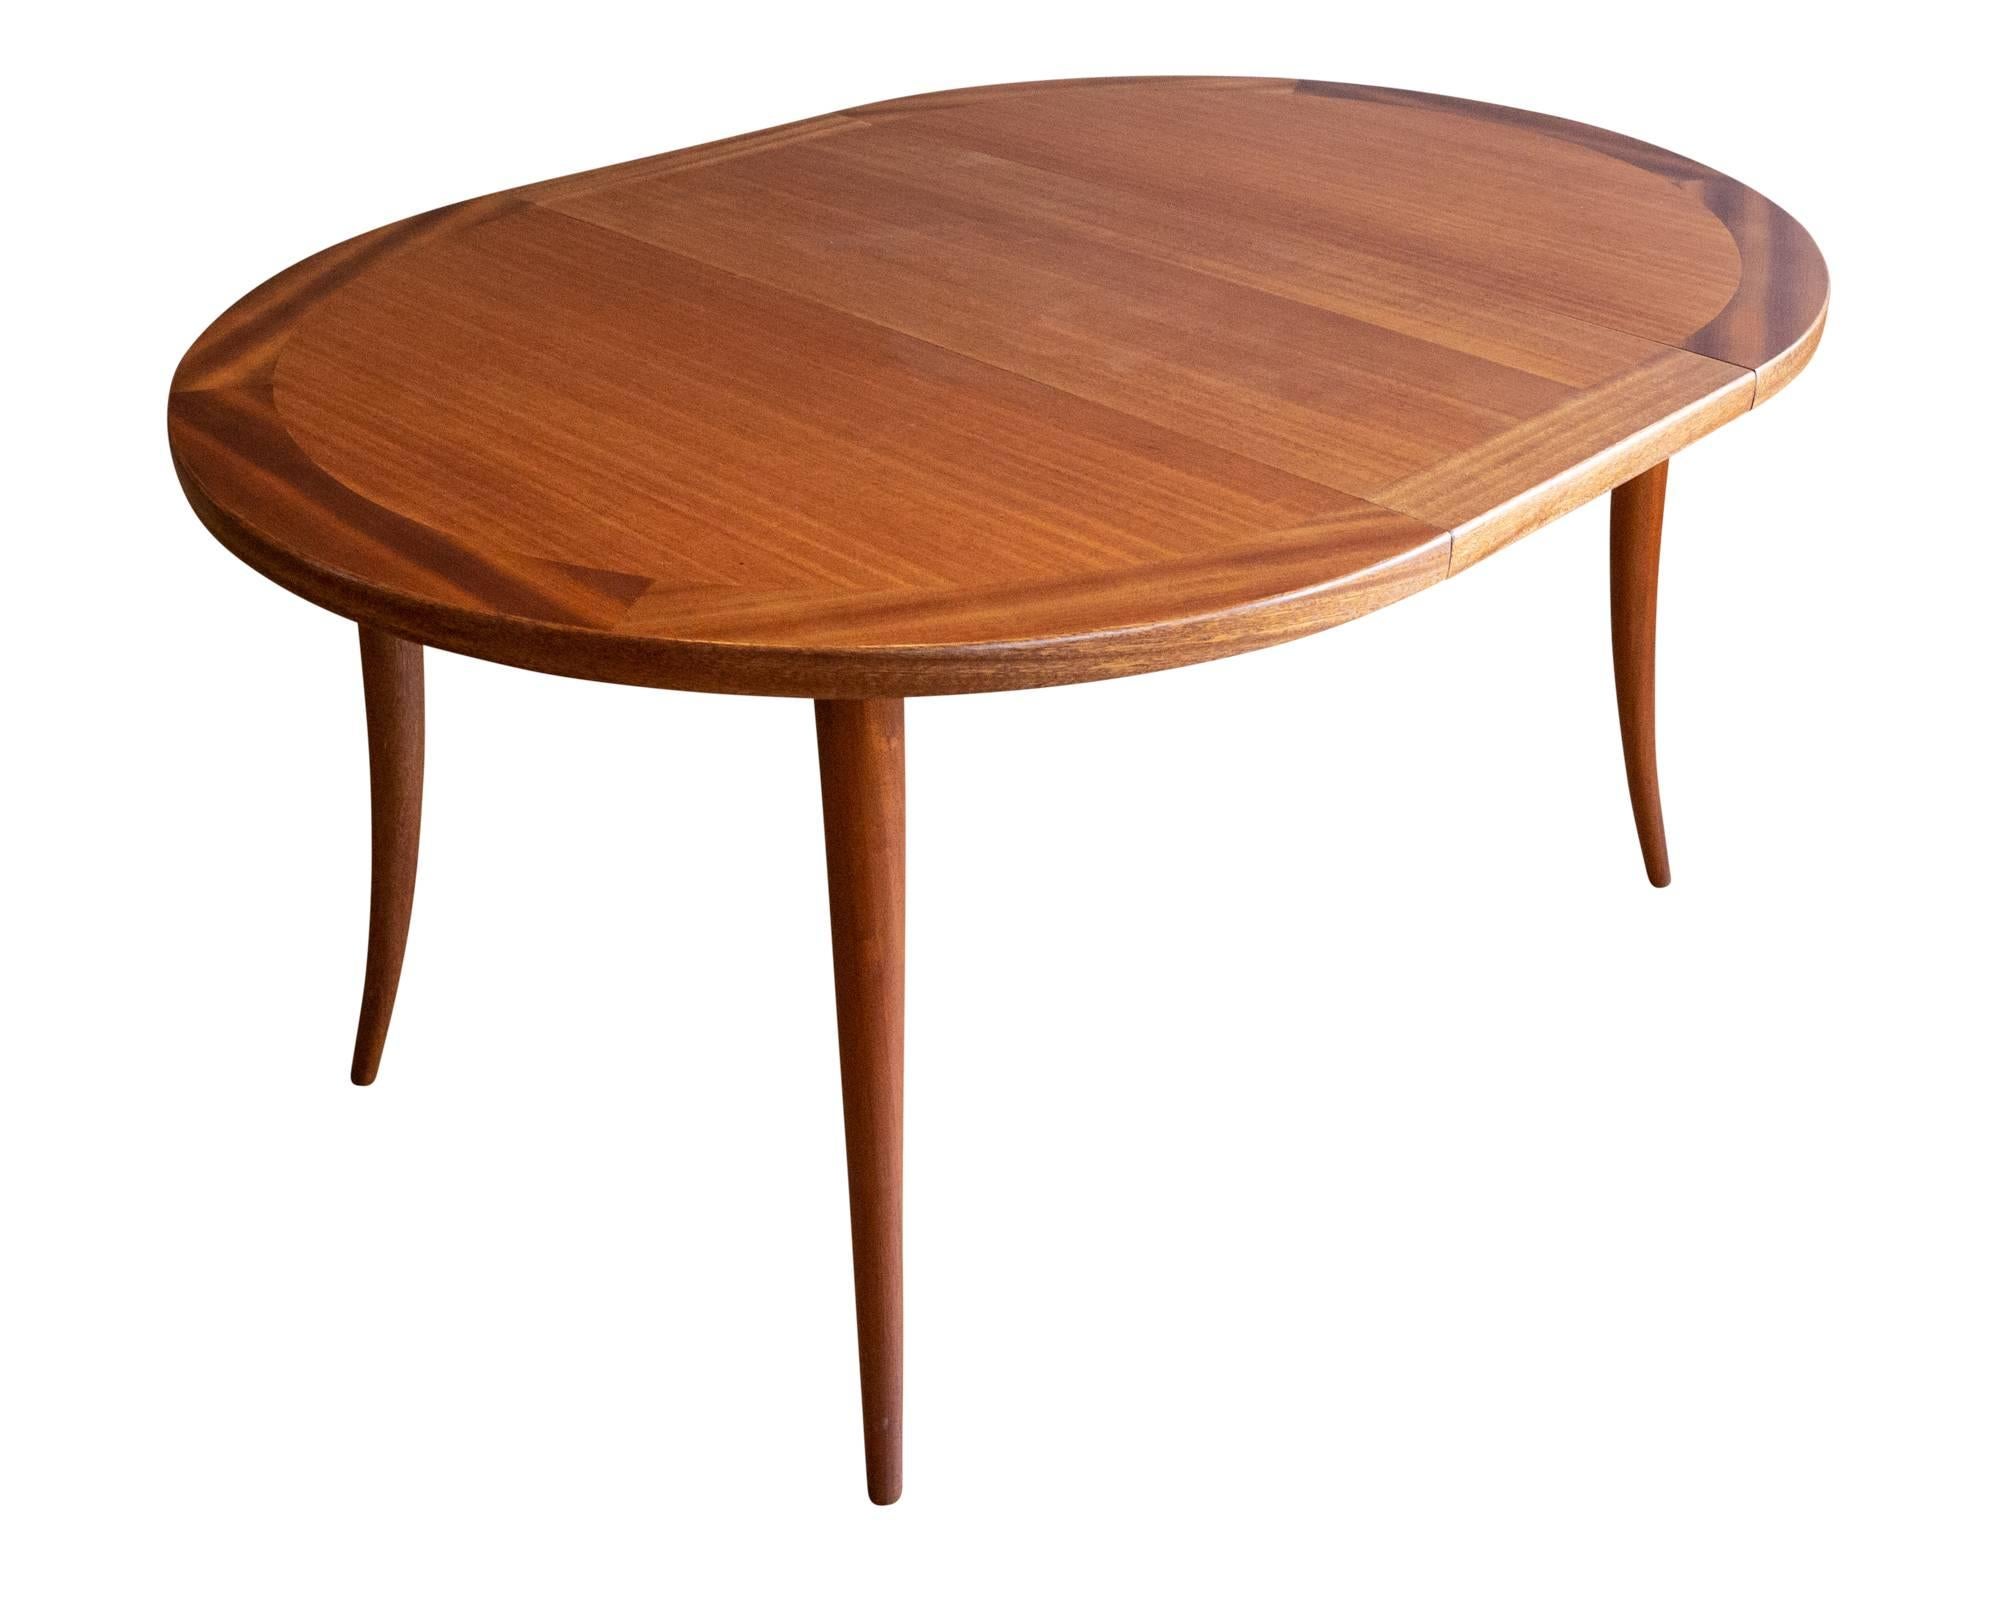 A rather handsome bleached mahogany dining table by American designer Harvey Probber, circa 1950s. Featuring a round top with parquetry border that opens to accommodate two 16